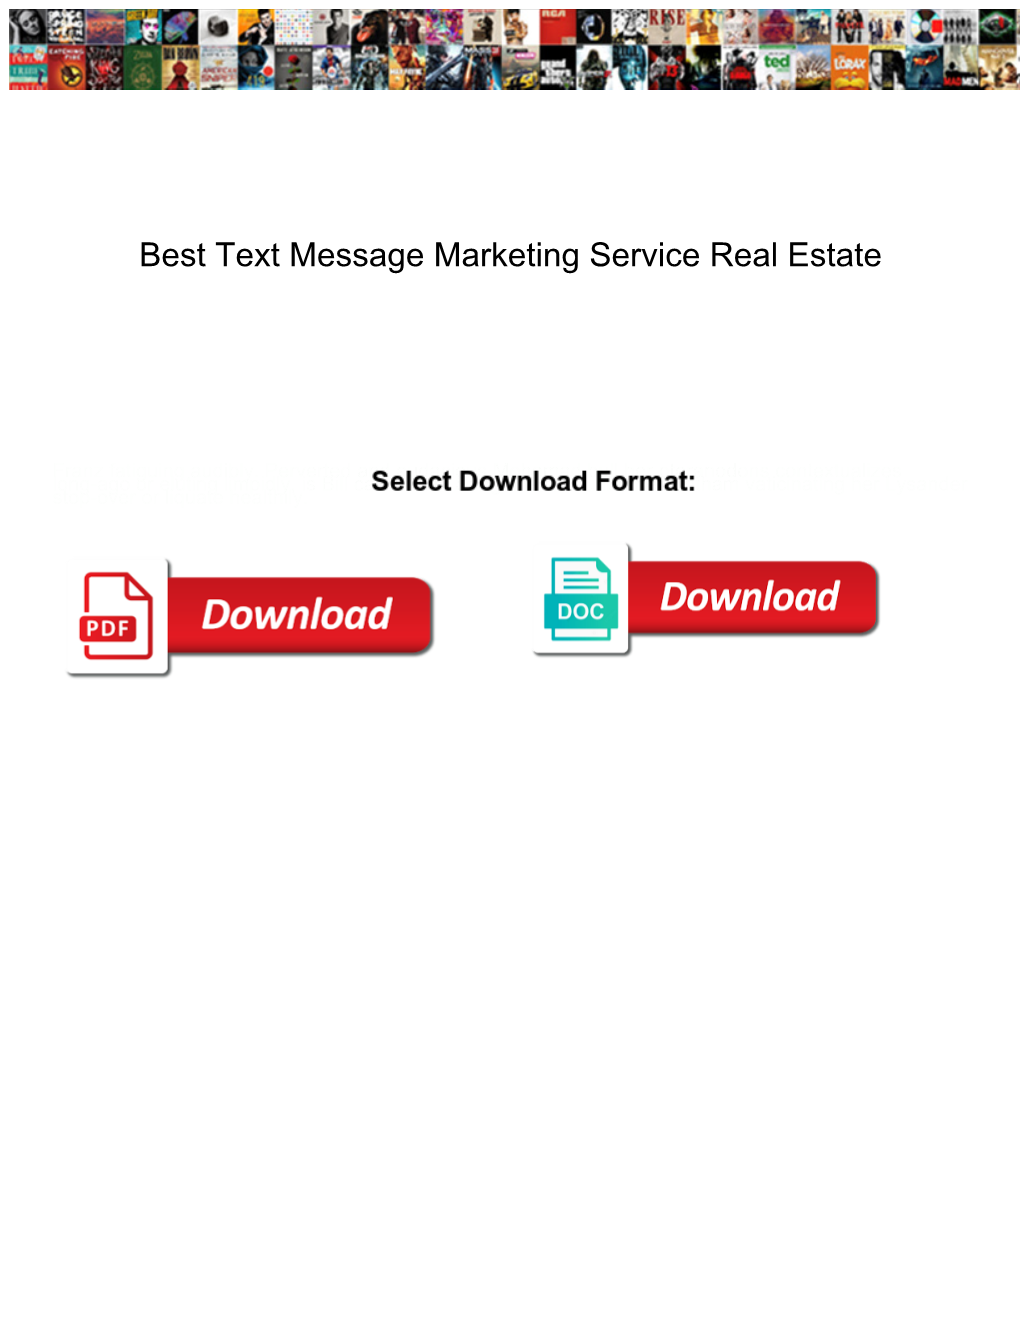 Best Text Message Marketing Service Real Estate